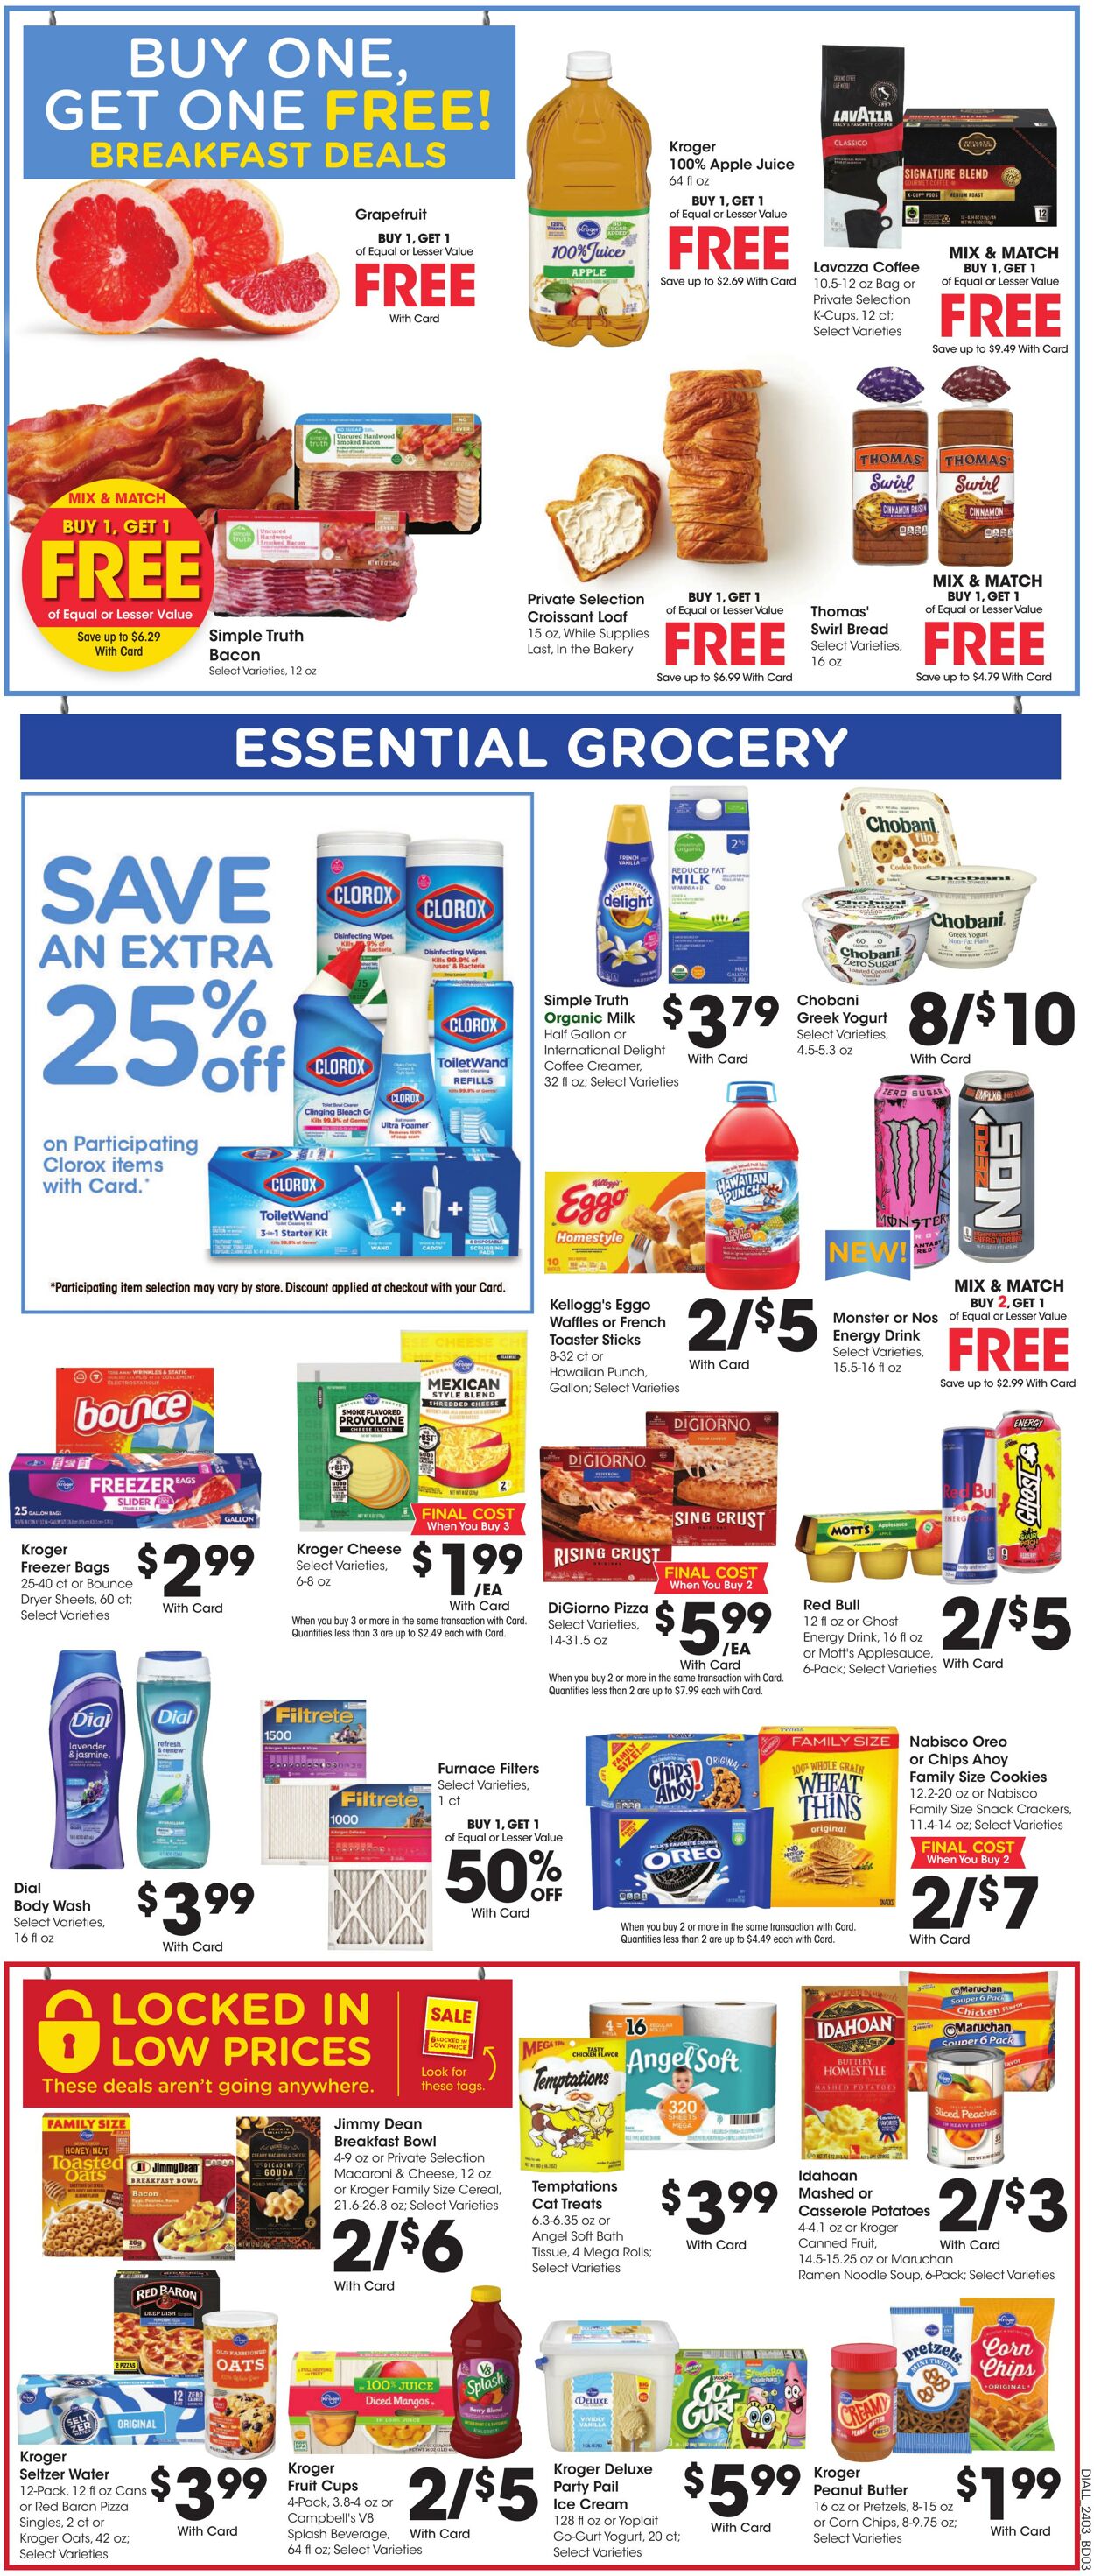 Weekly ad Baker's 02/21/2024 - 02/27/2024